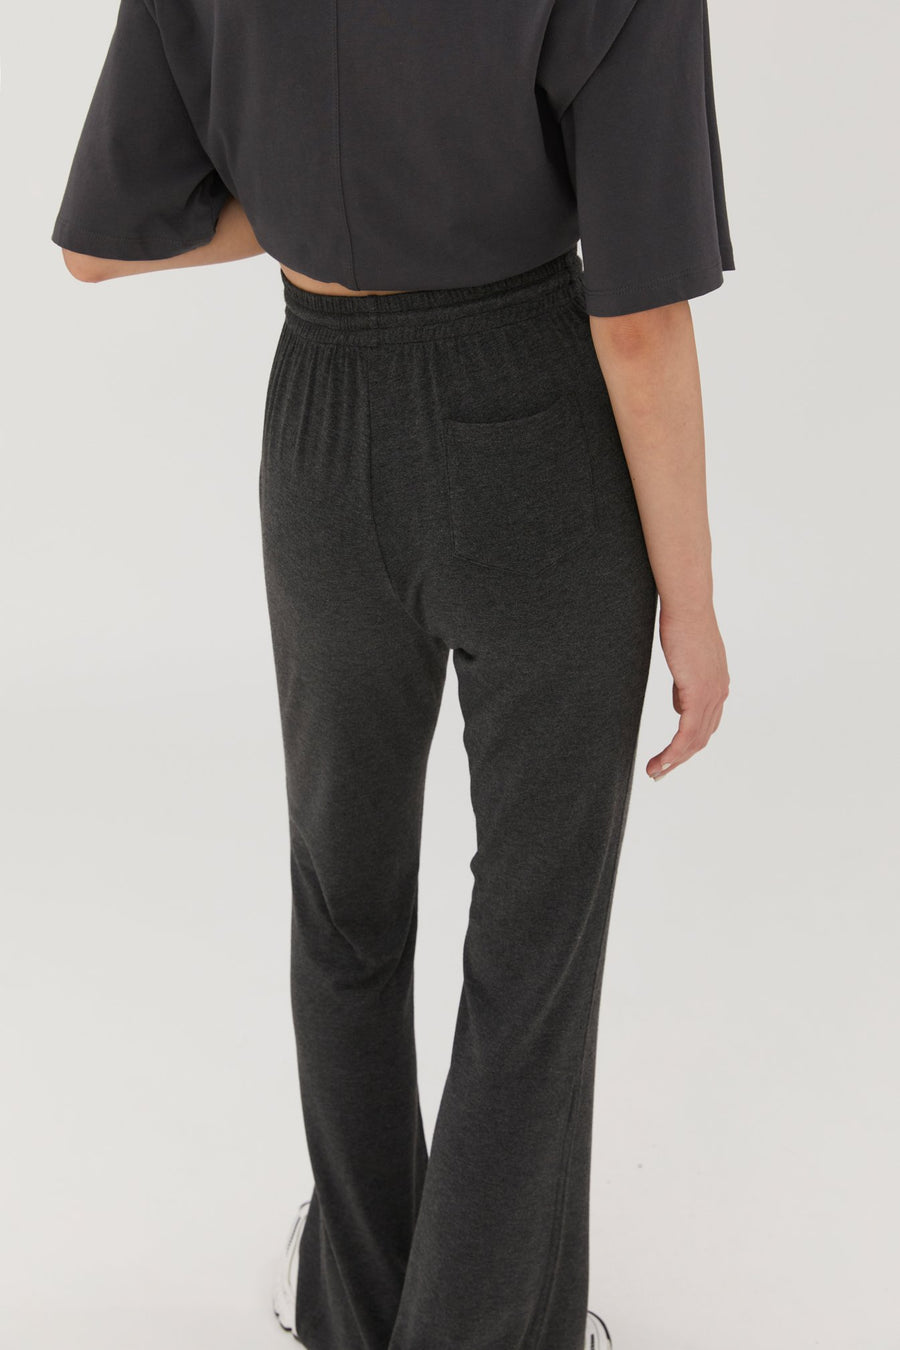 by DOE - The Slimming Pant